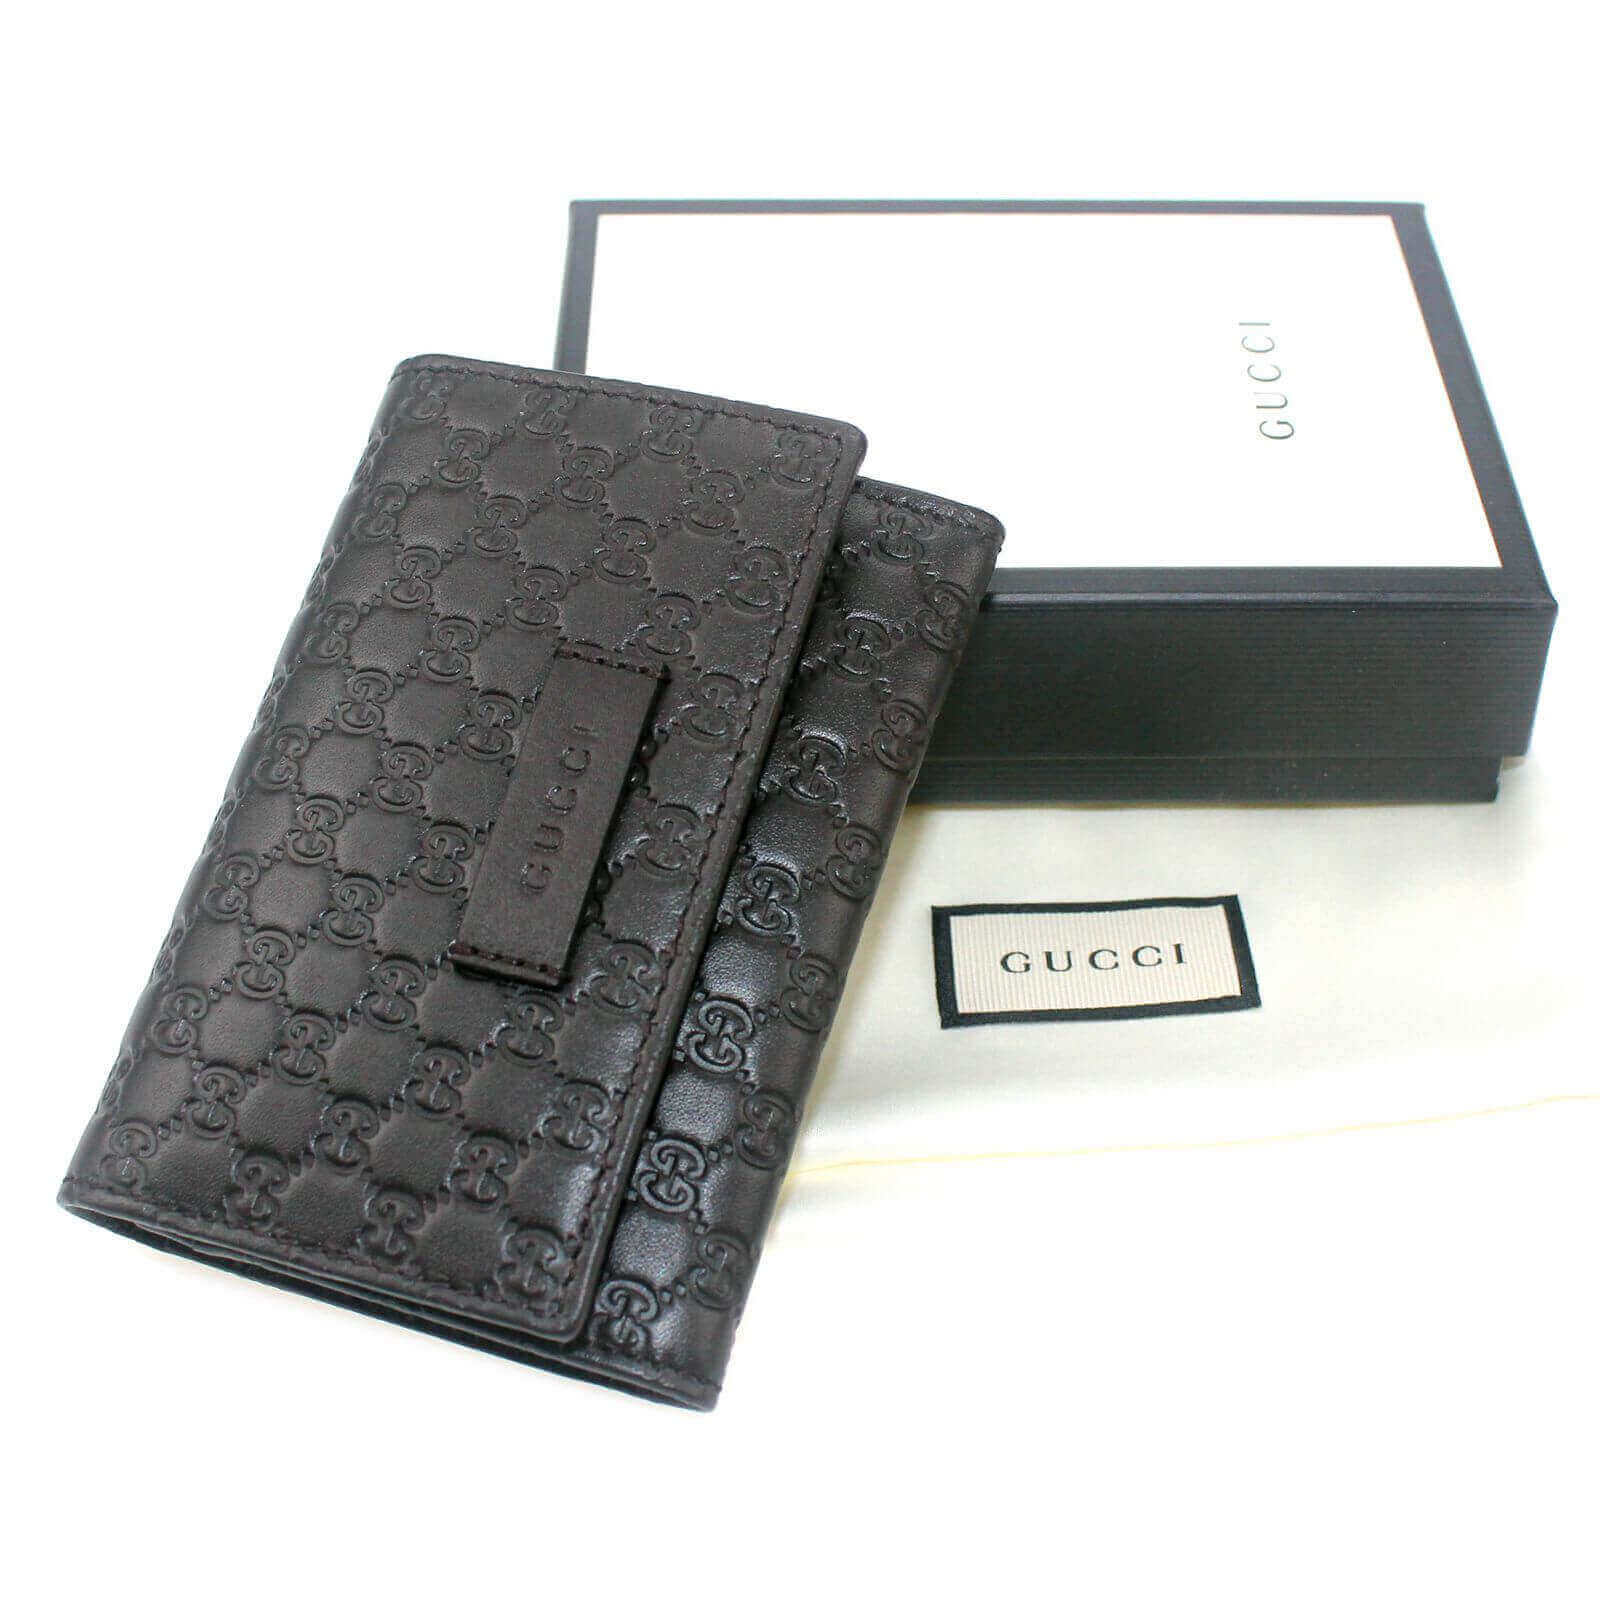 Gucci Card Holder Sale | Guccissima Leather Brown 544030 | BagBuyBuy